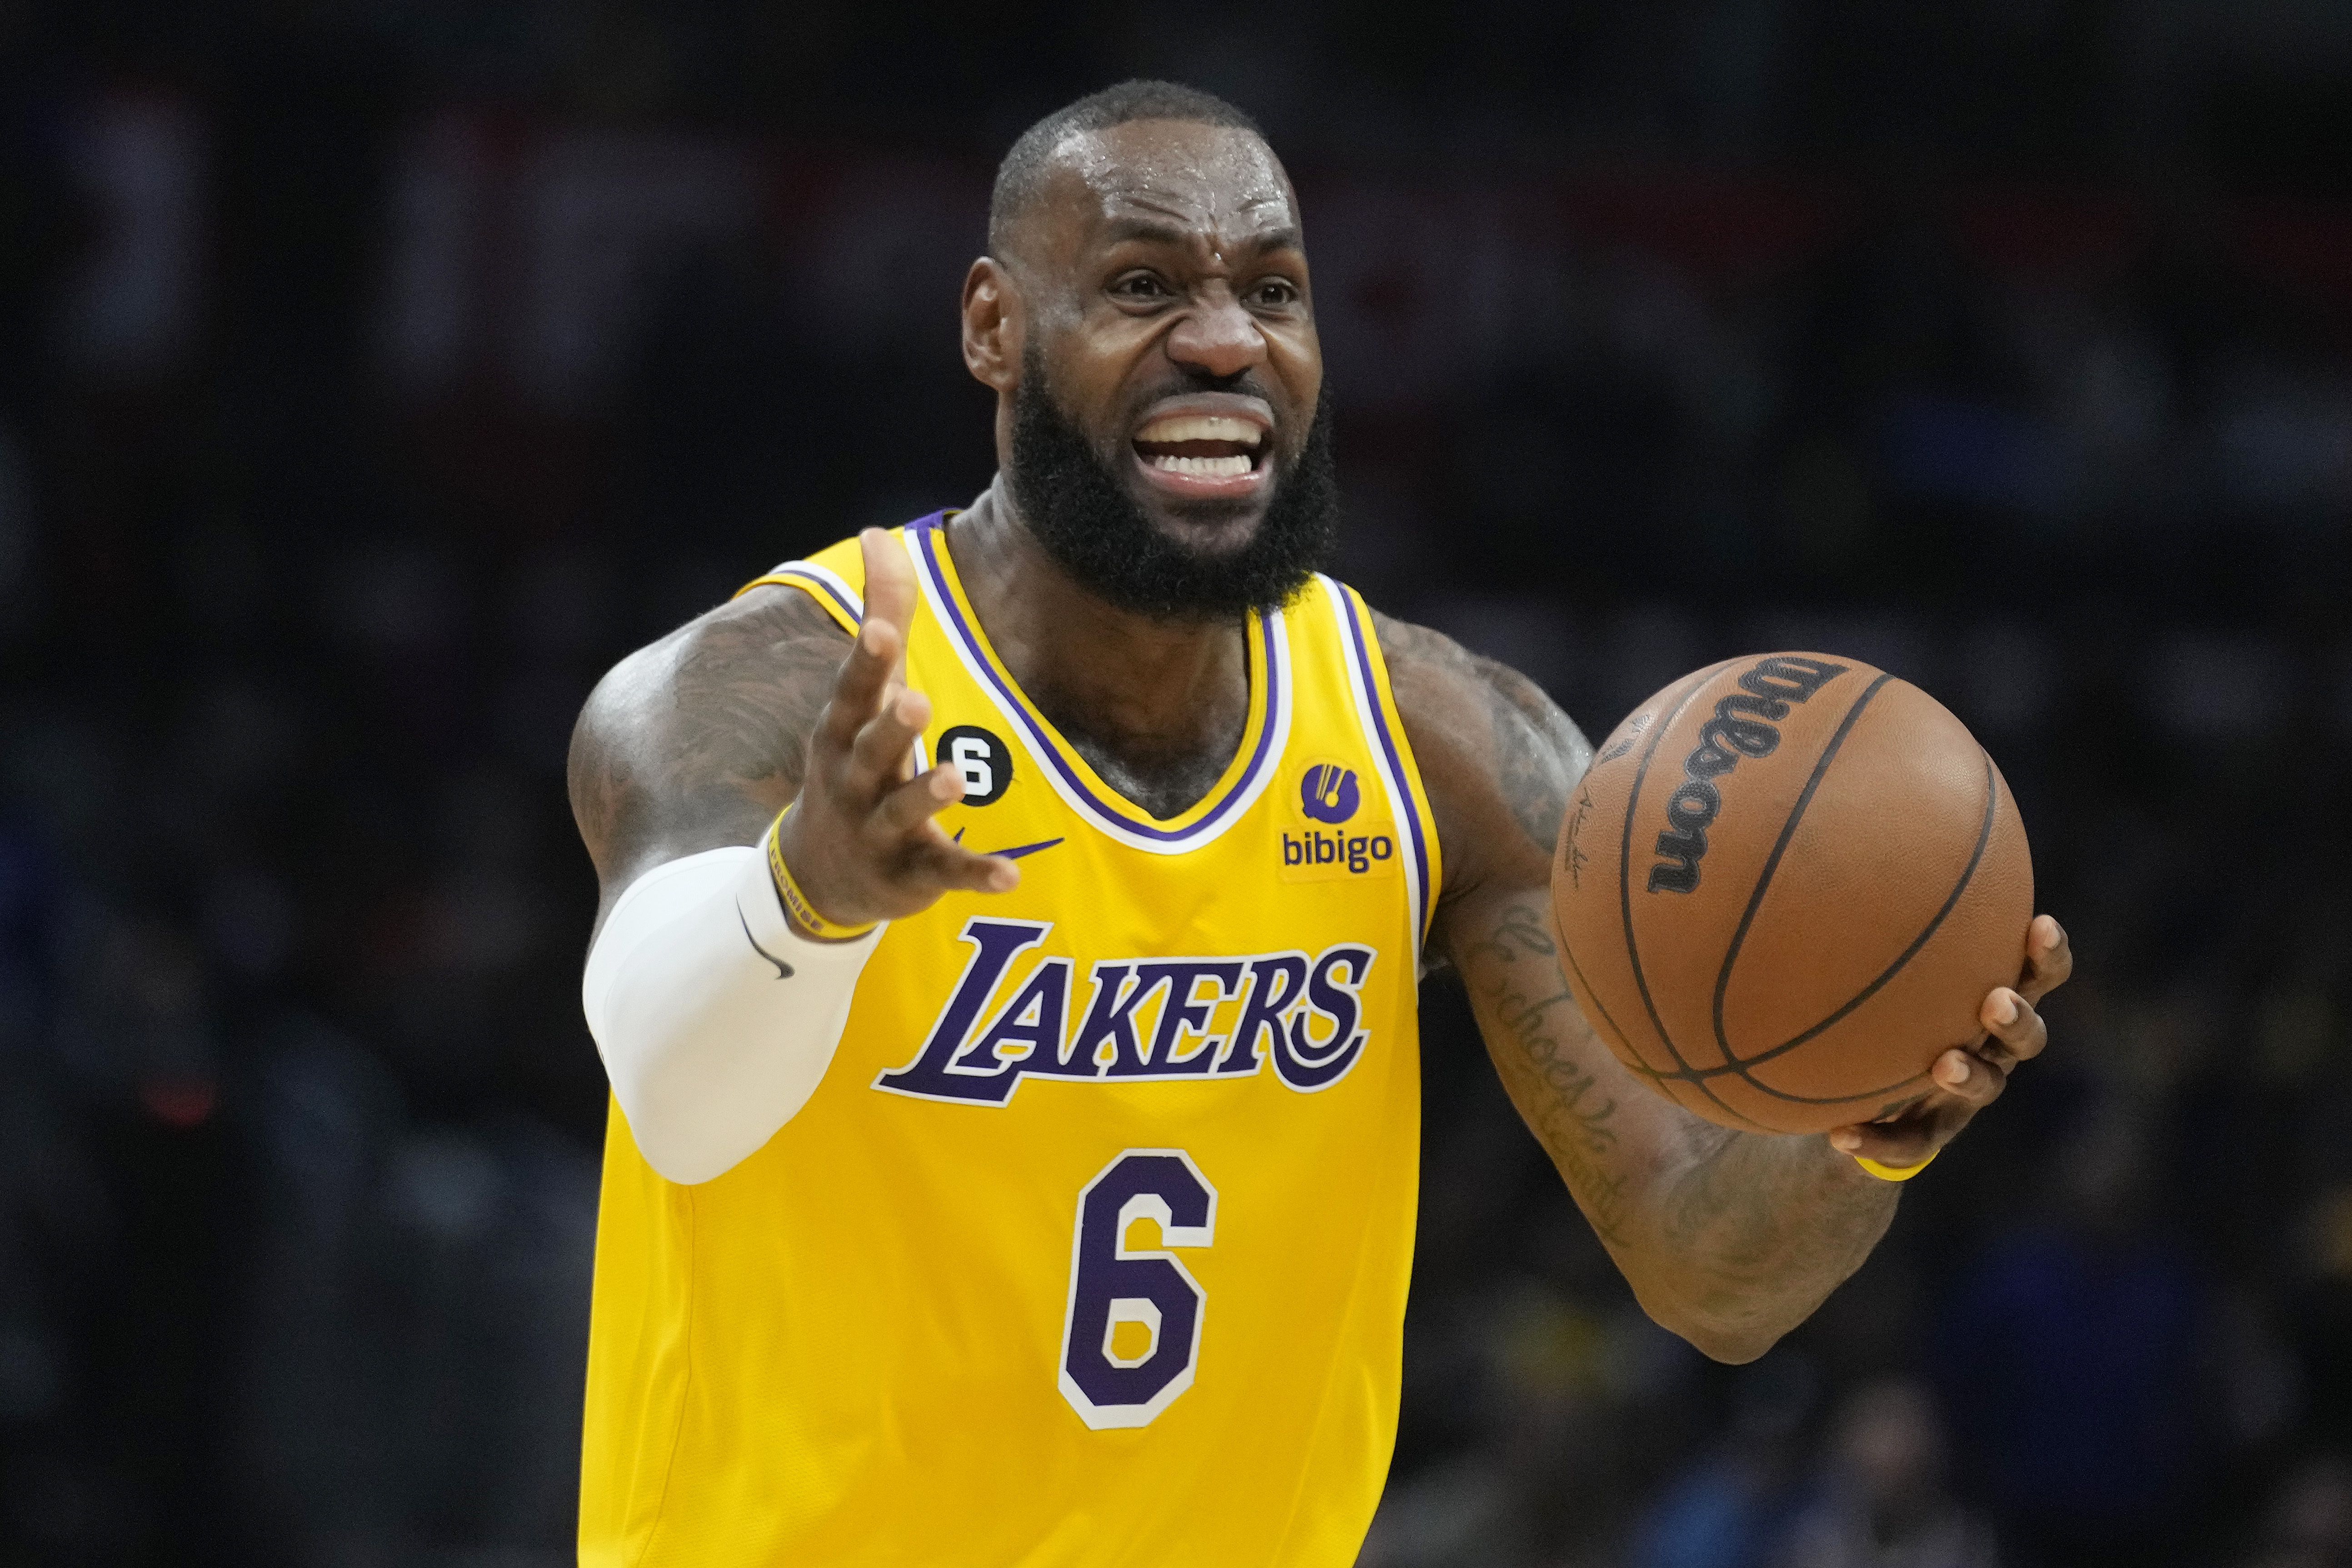 How to watch LeBron James, Jon Morant in Lakers vs